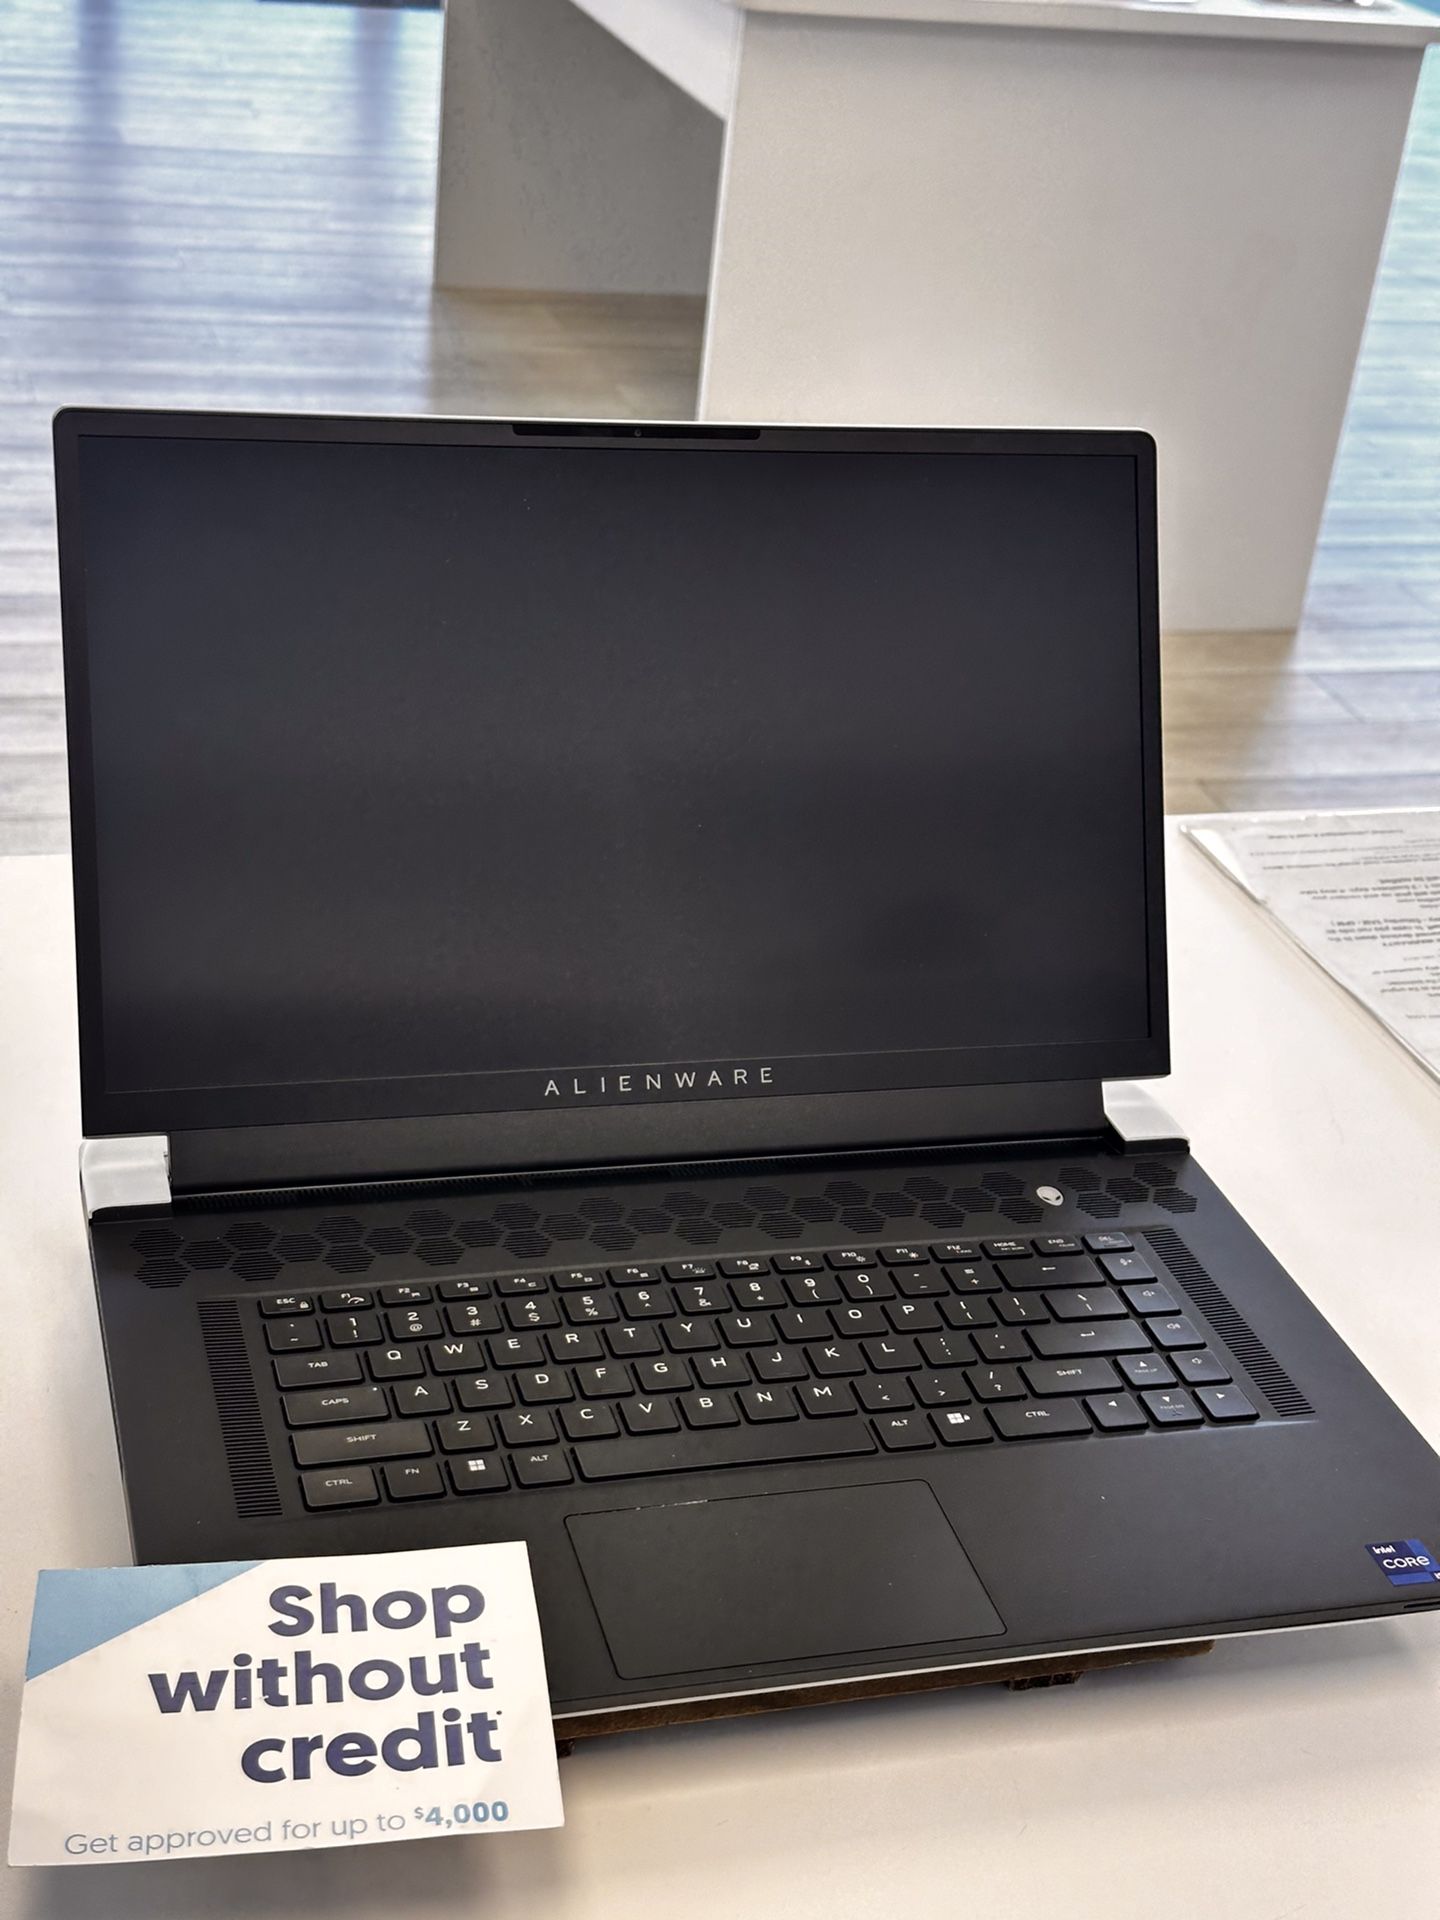 Alienware M17 R5 17.3 Gaming Laptop - Pay $1 Today to Take it Home and Pay the Rest Later! We 